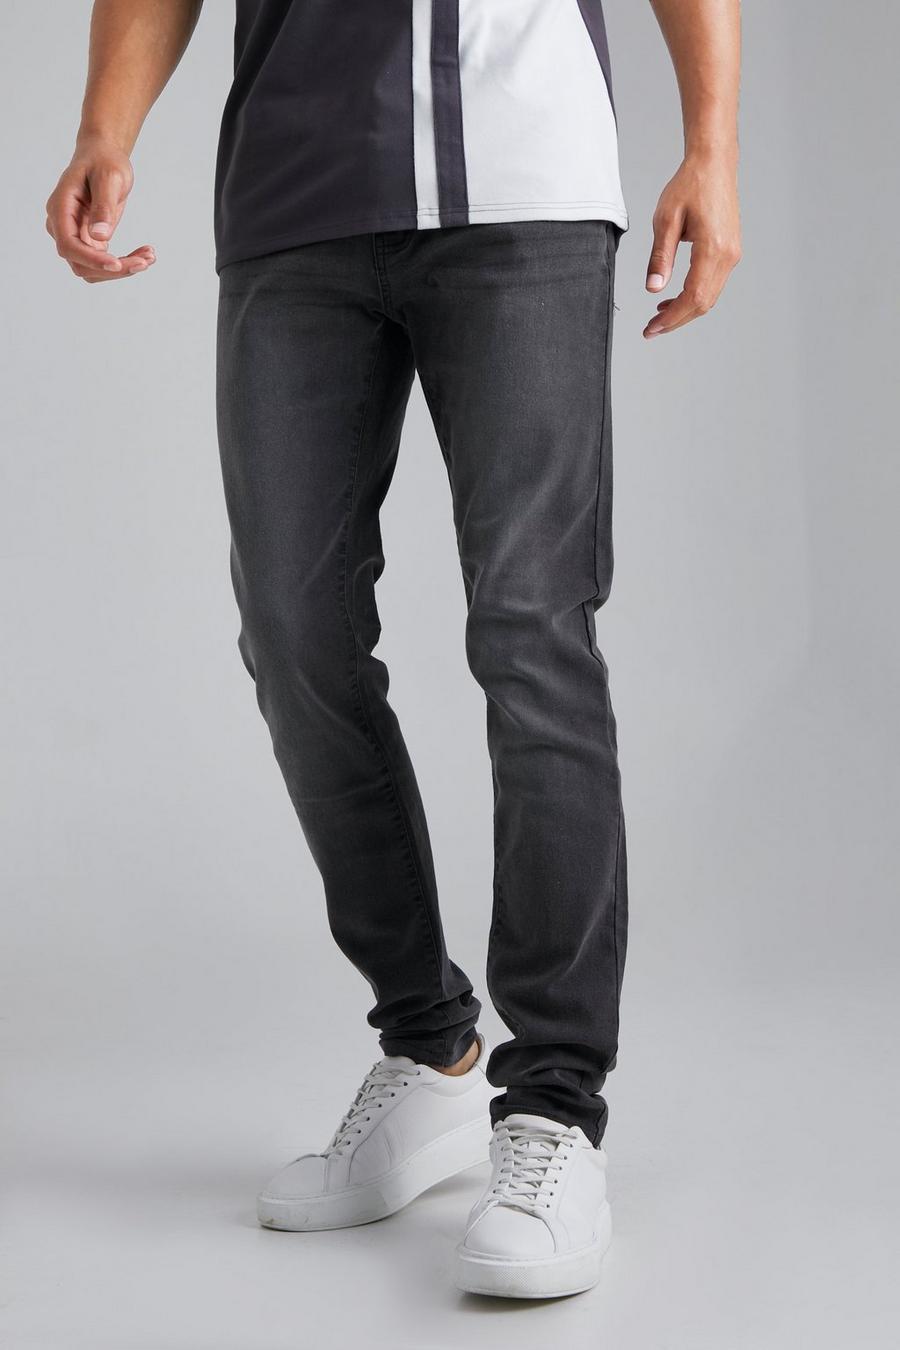 Charcoal gris Tall Stretch Skinny Fit Jeans